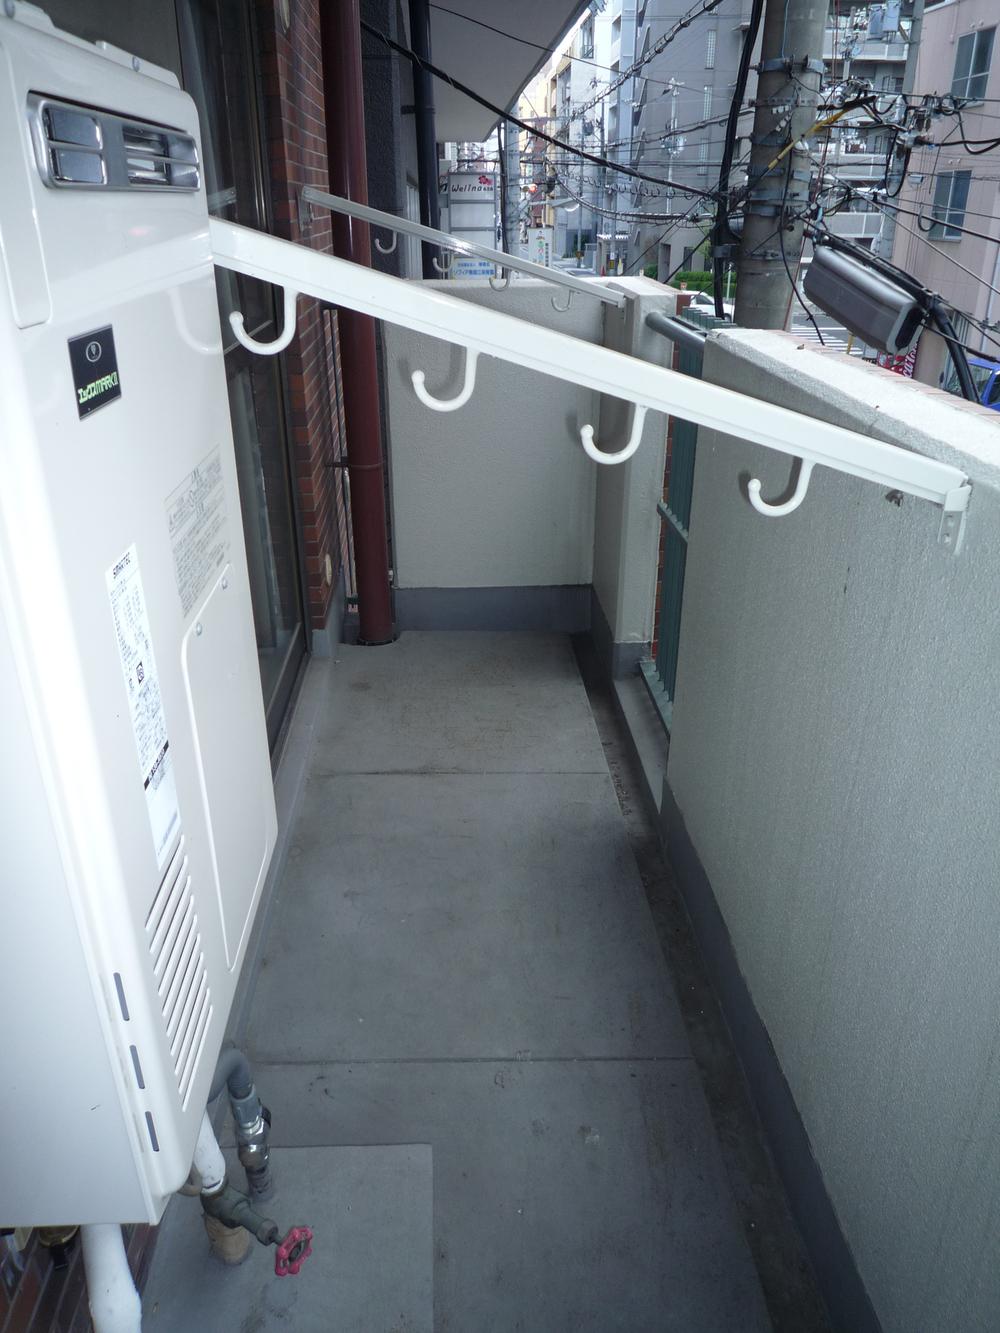 Balcony. South balcony part.  Look to the left is the water heater.